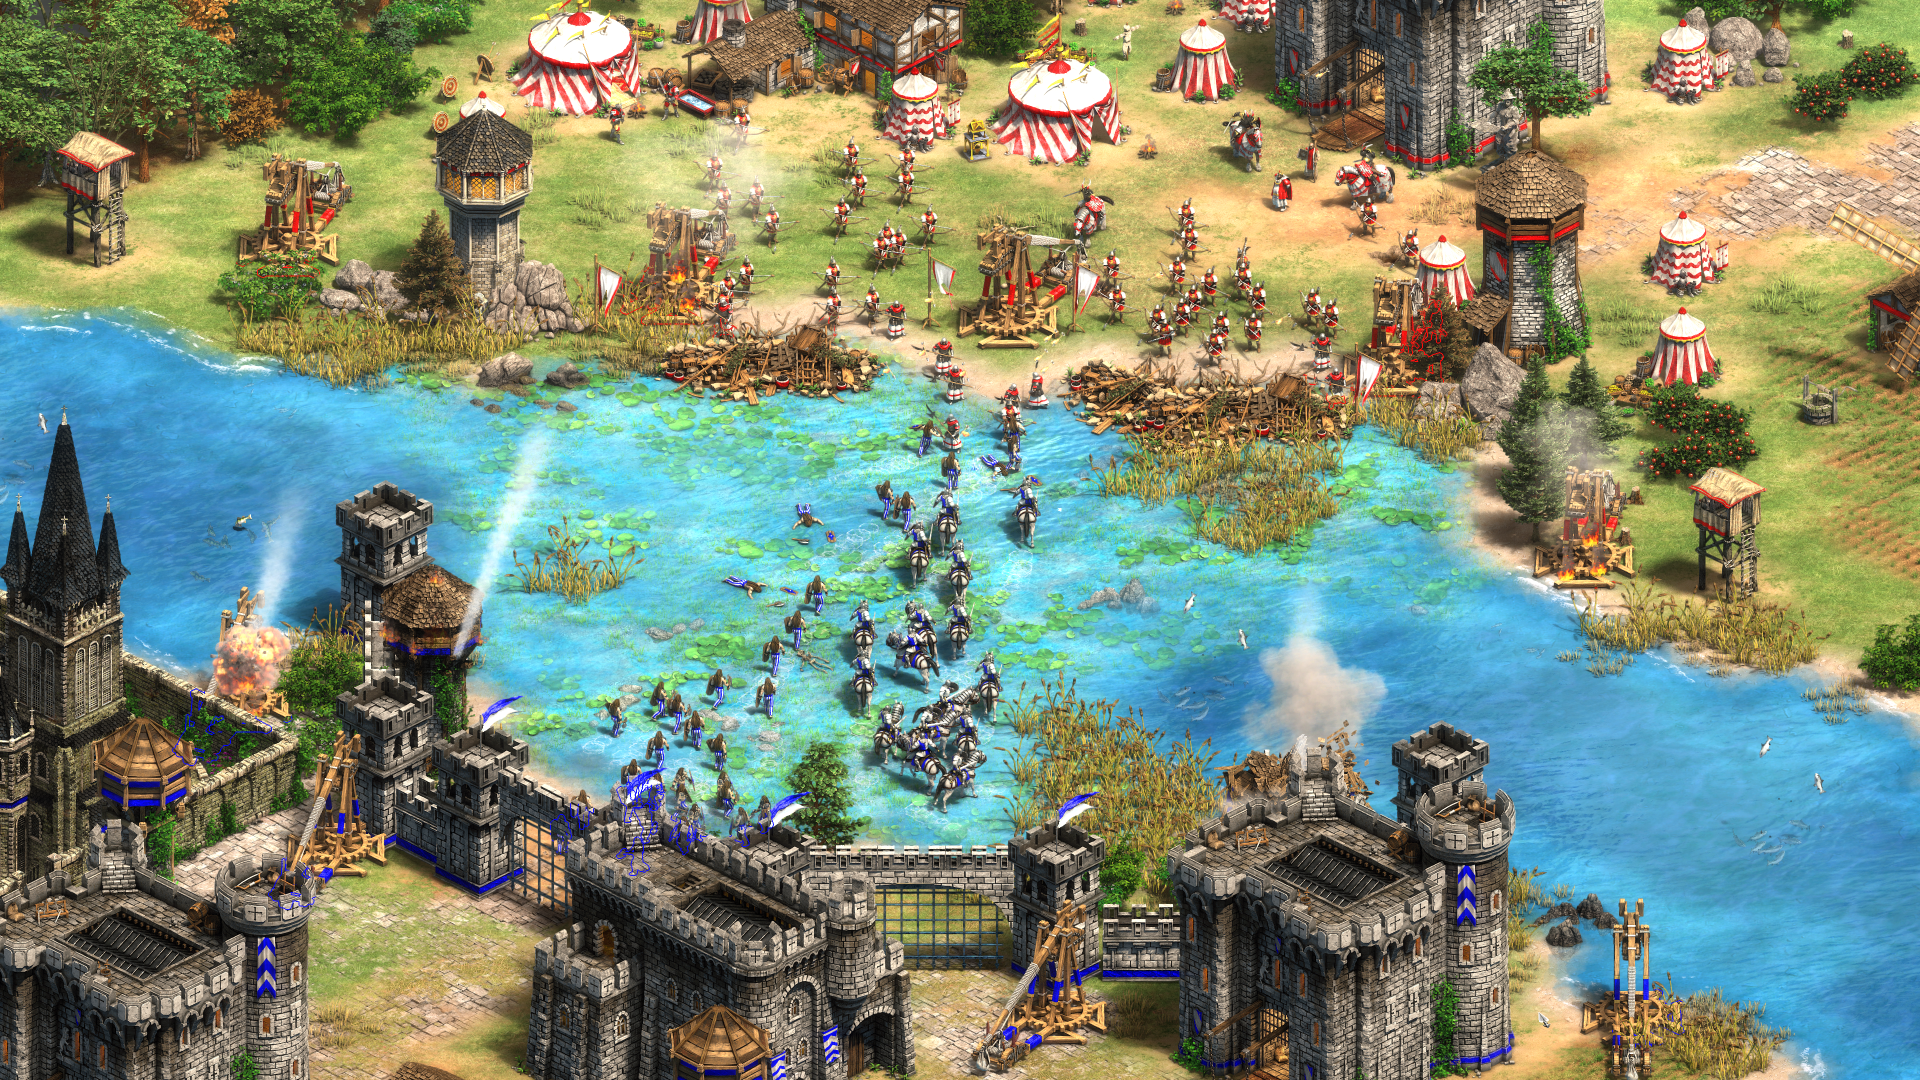 Age of Empires II: Definitive Edition Review. Tom's Guide